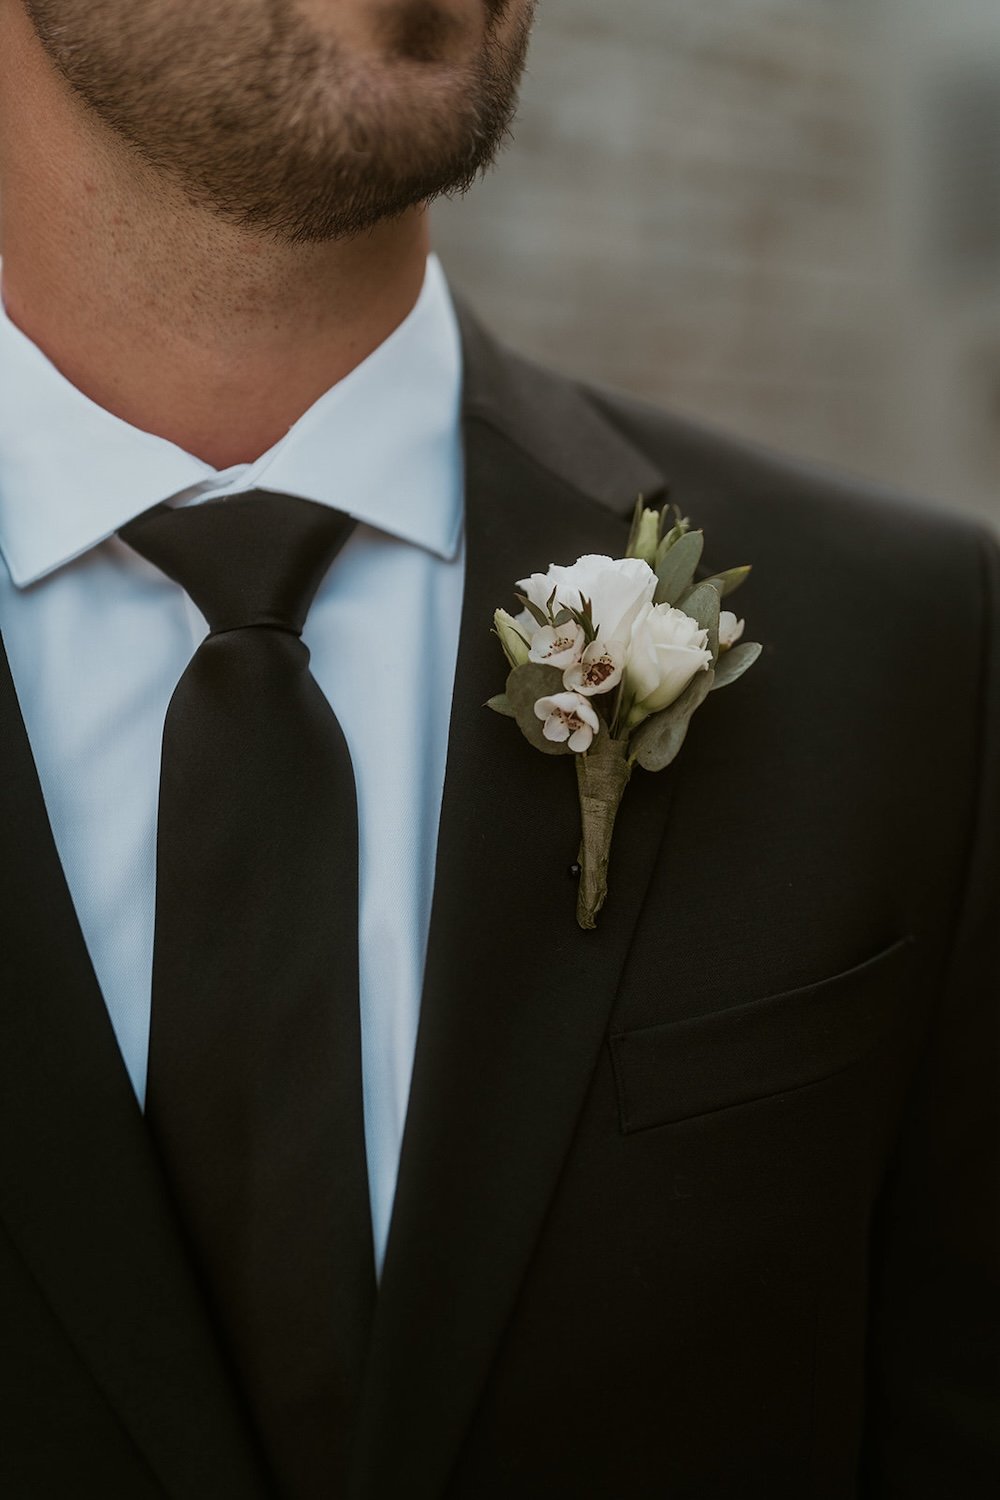 Detail photo of the grooms boutonnière. 